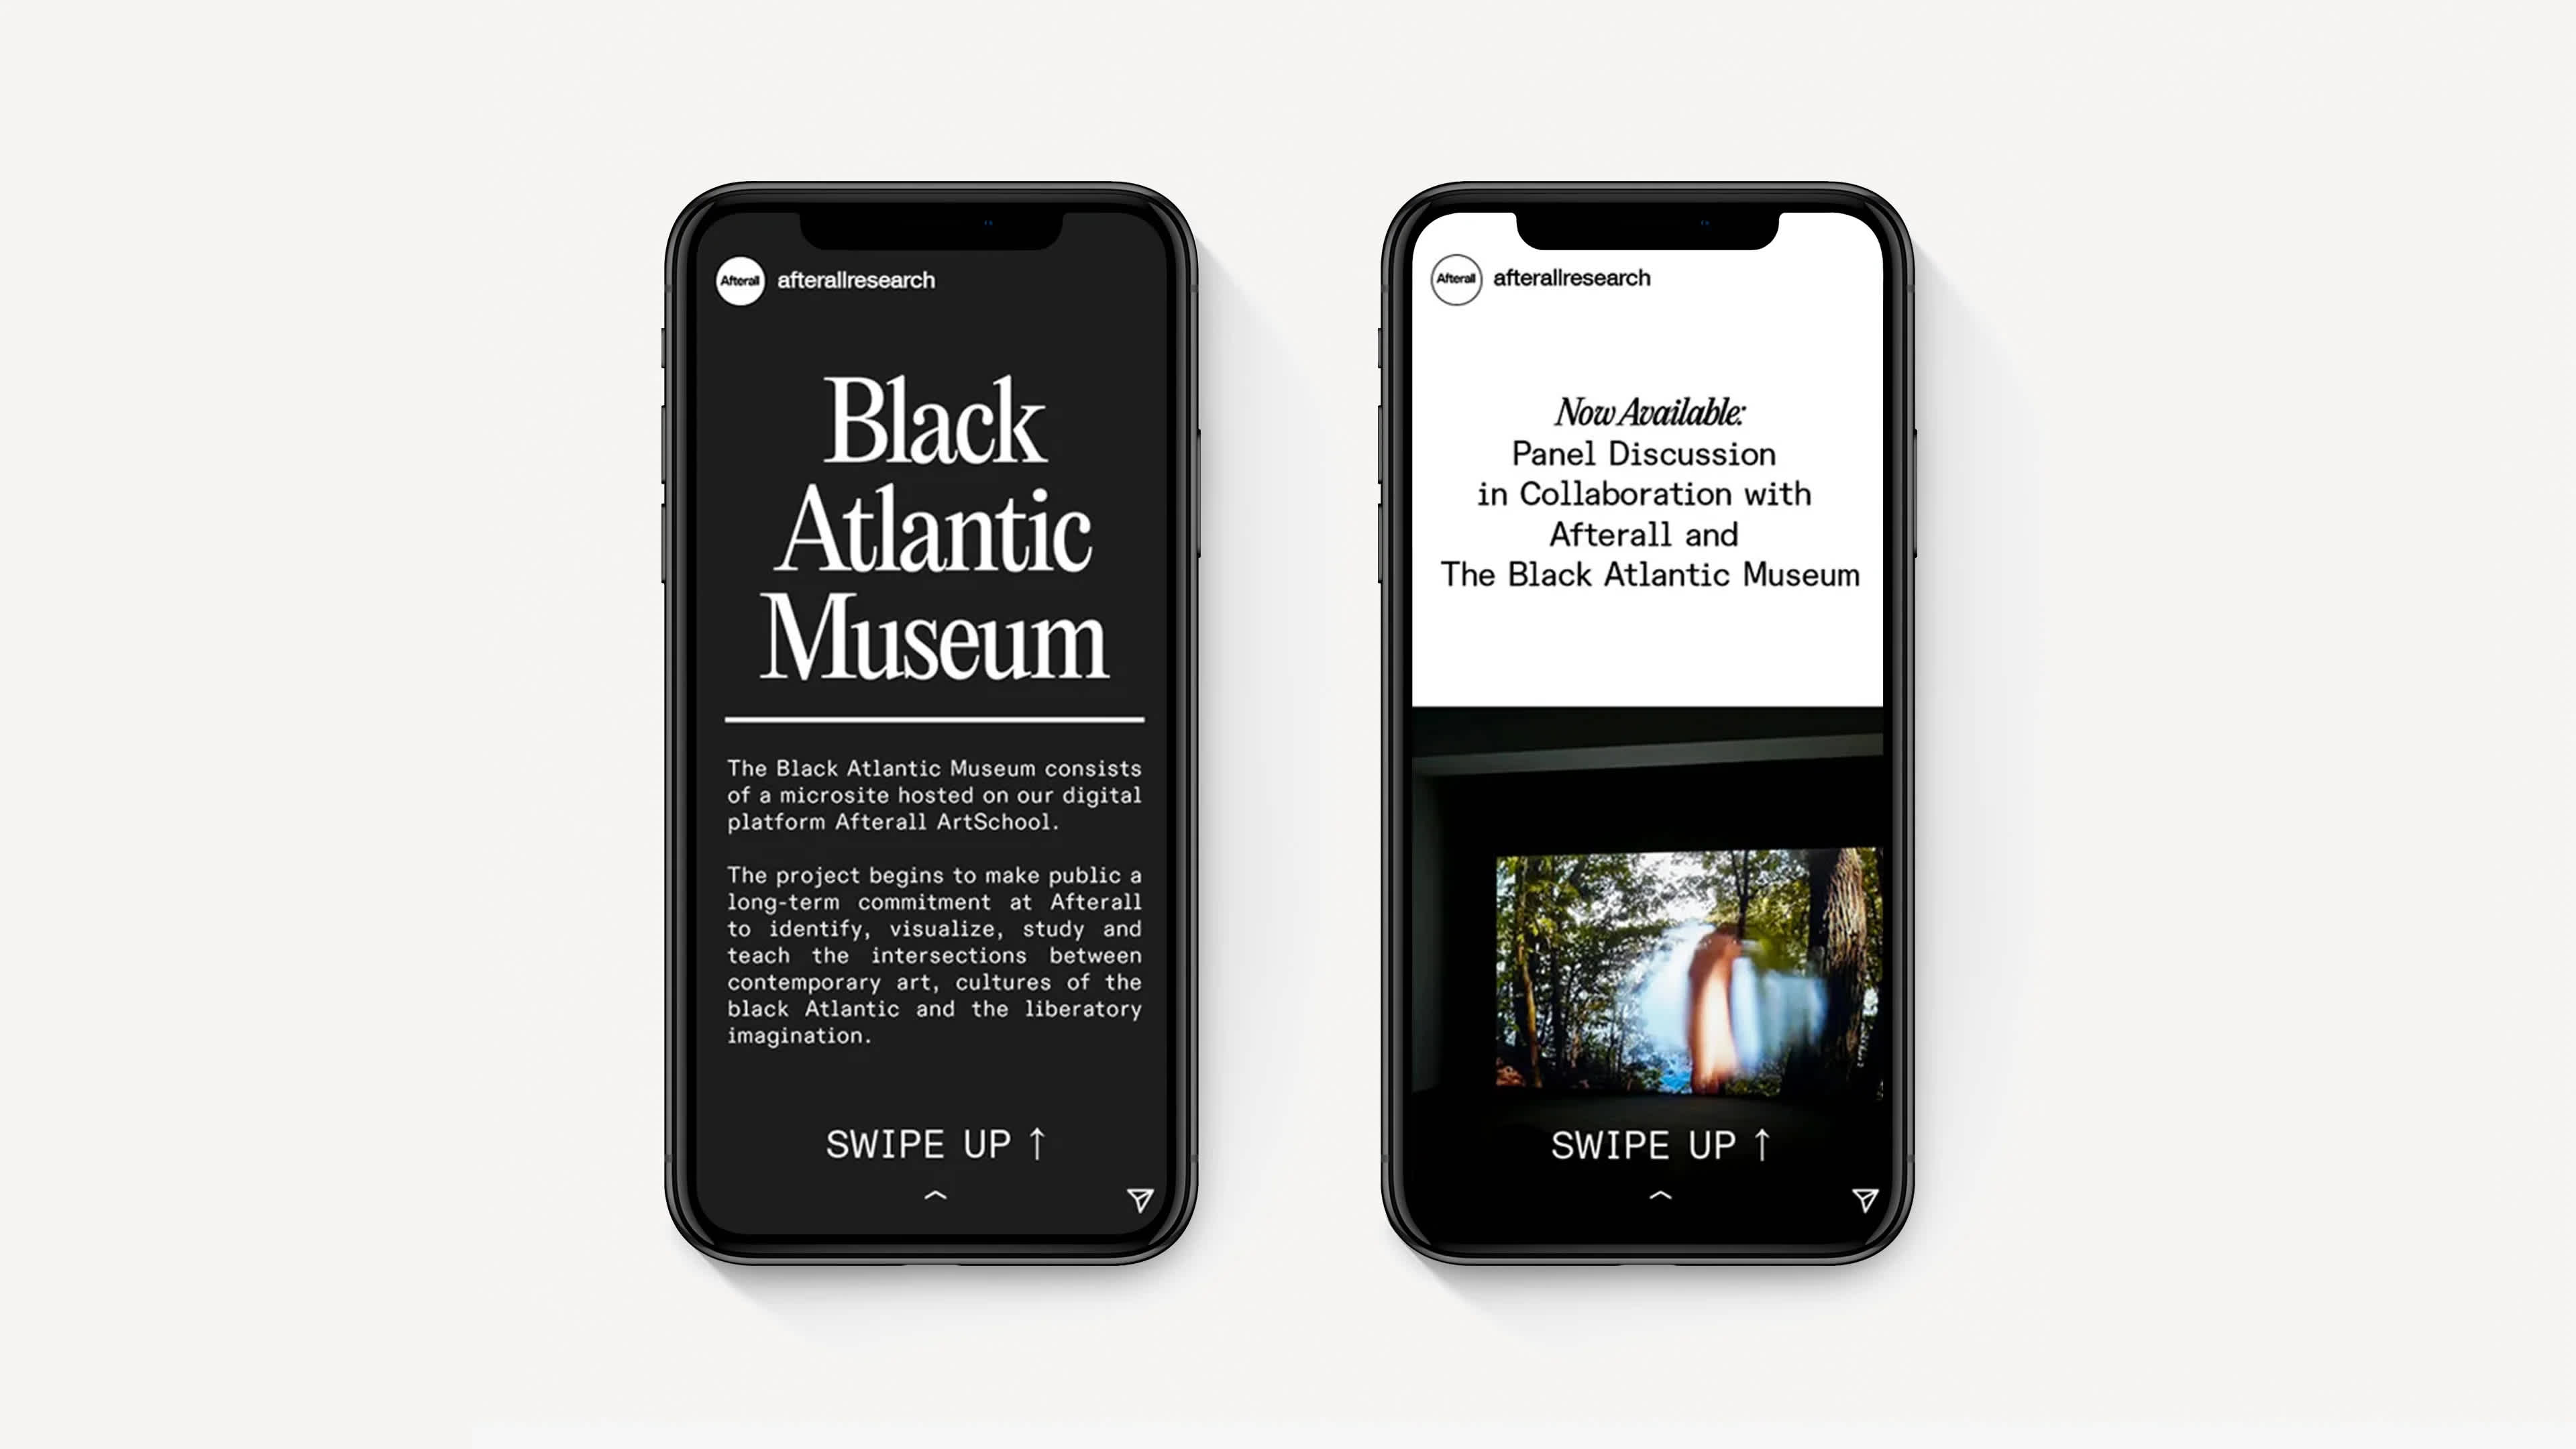 Two phones on an off-white background. The left phone features an instagram story with the title "Black Atlantic Museum" in white text on a black background. The phone on the right is also an instagram story, but the screen is split in half. The top half if white with black text, and the bottom half is an image of a film screening in a dark room.